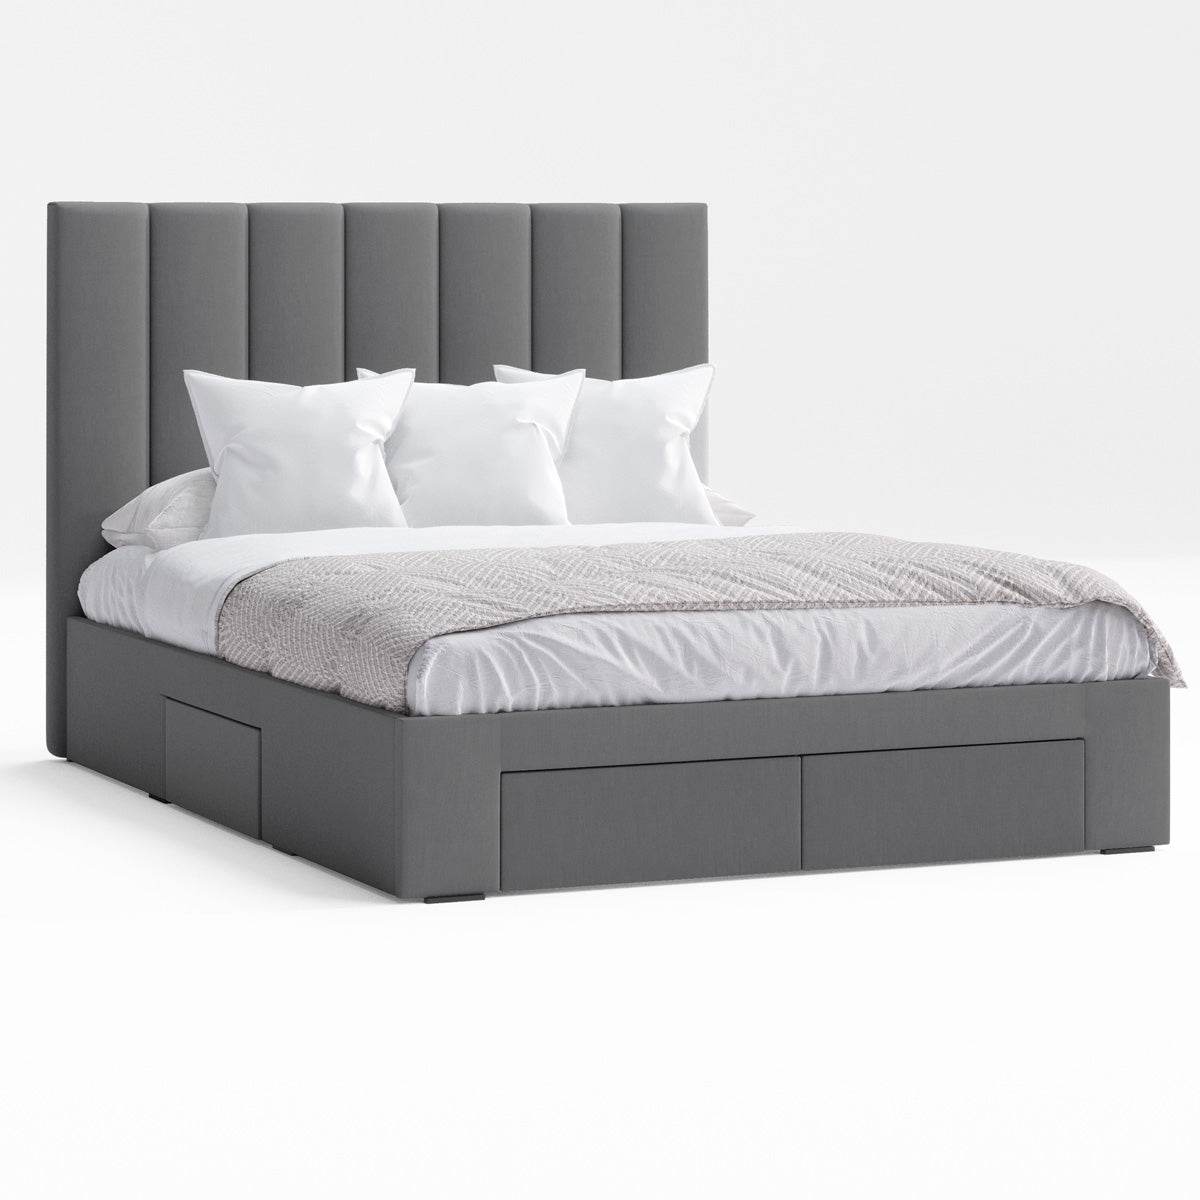 Celine Bed Frame with Four Storage Drawers (Charcoal Fabric)